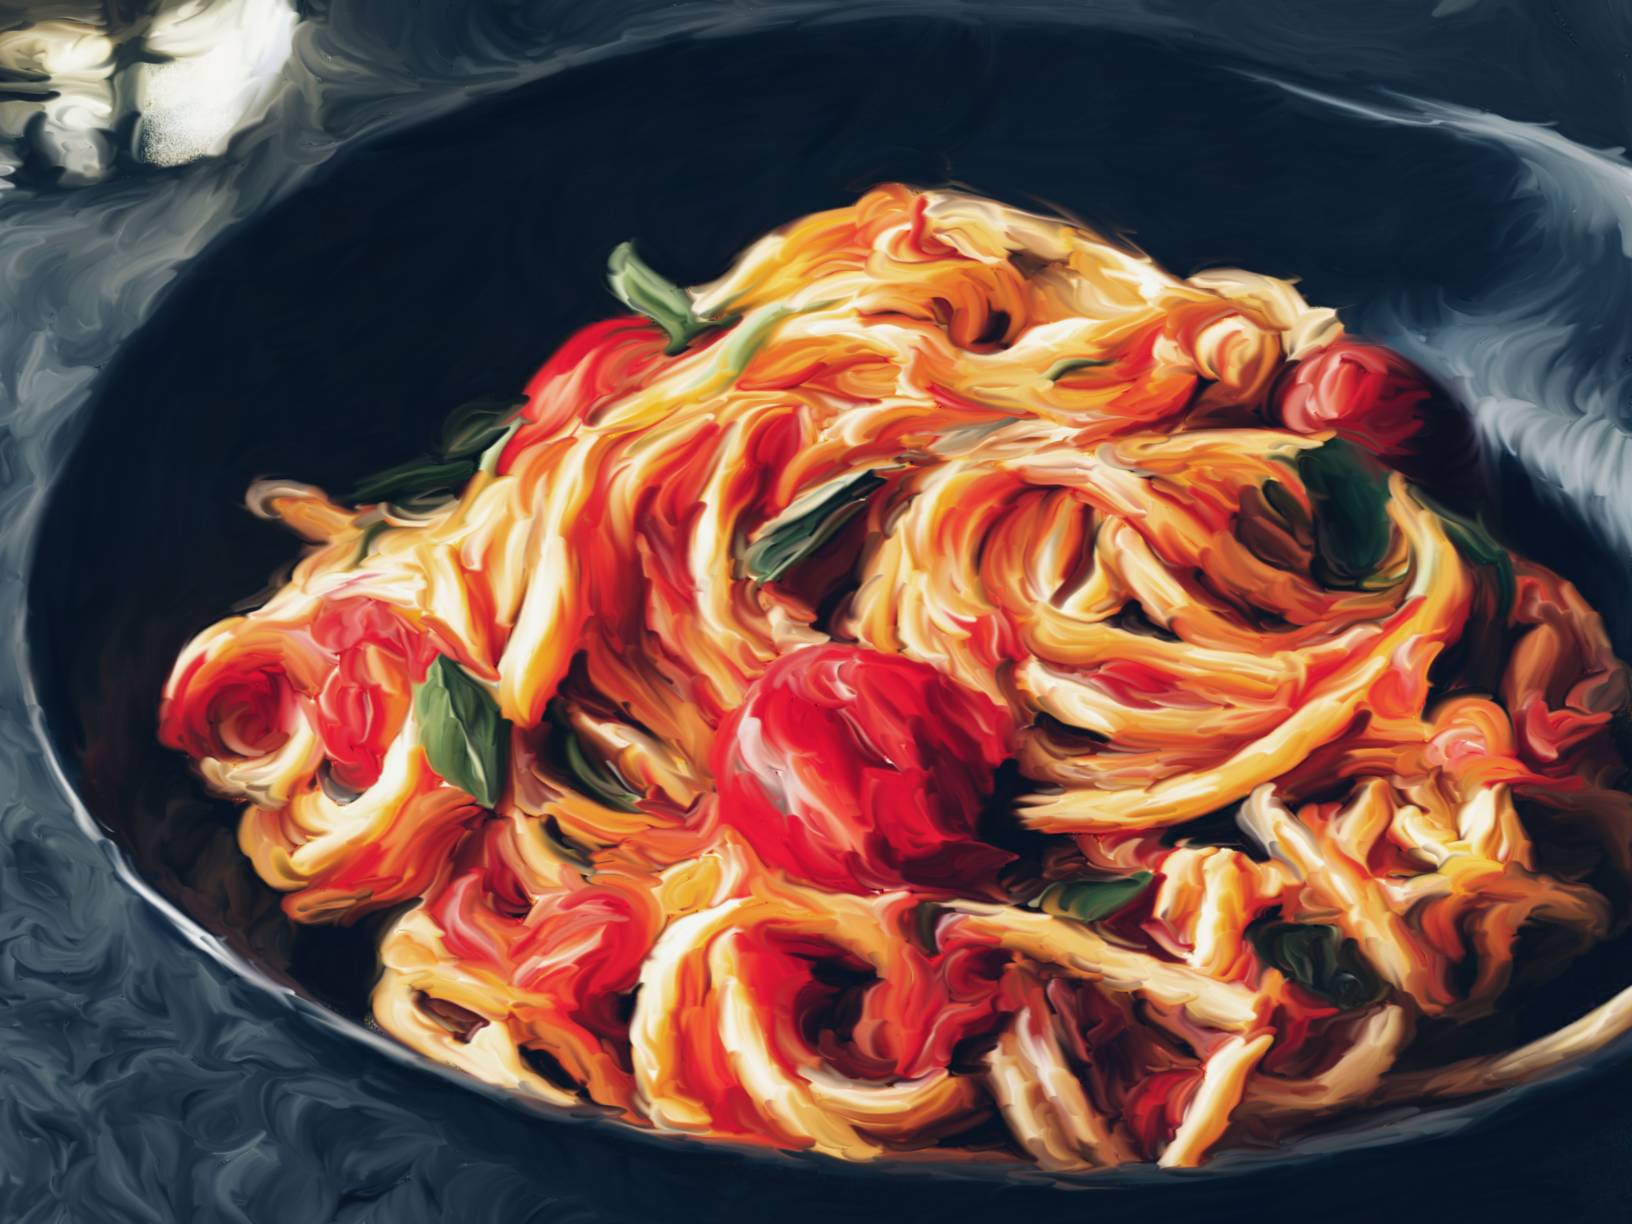 7 Mouthwatering Pasta Recipes for a Flavorful Dinner Experience